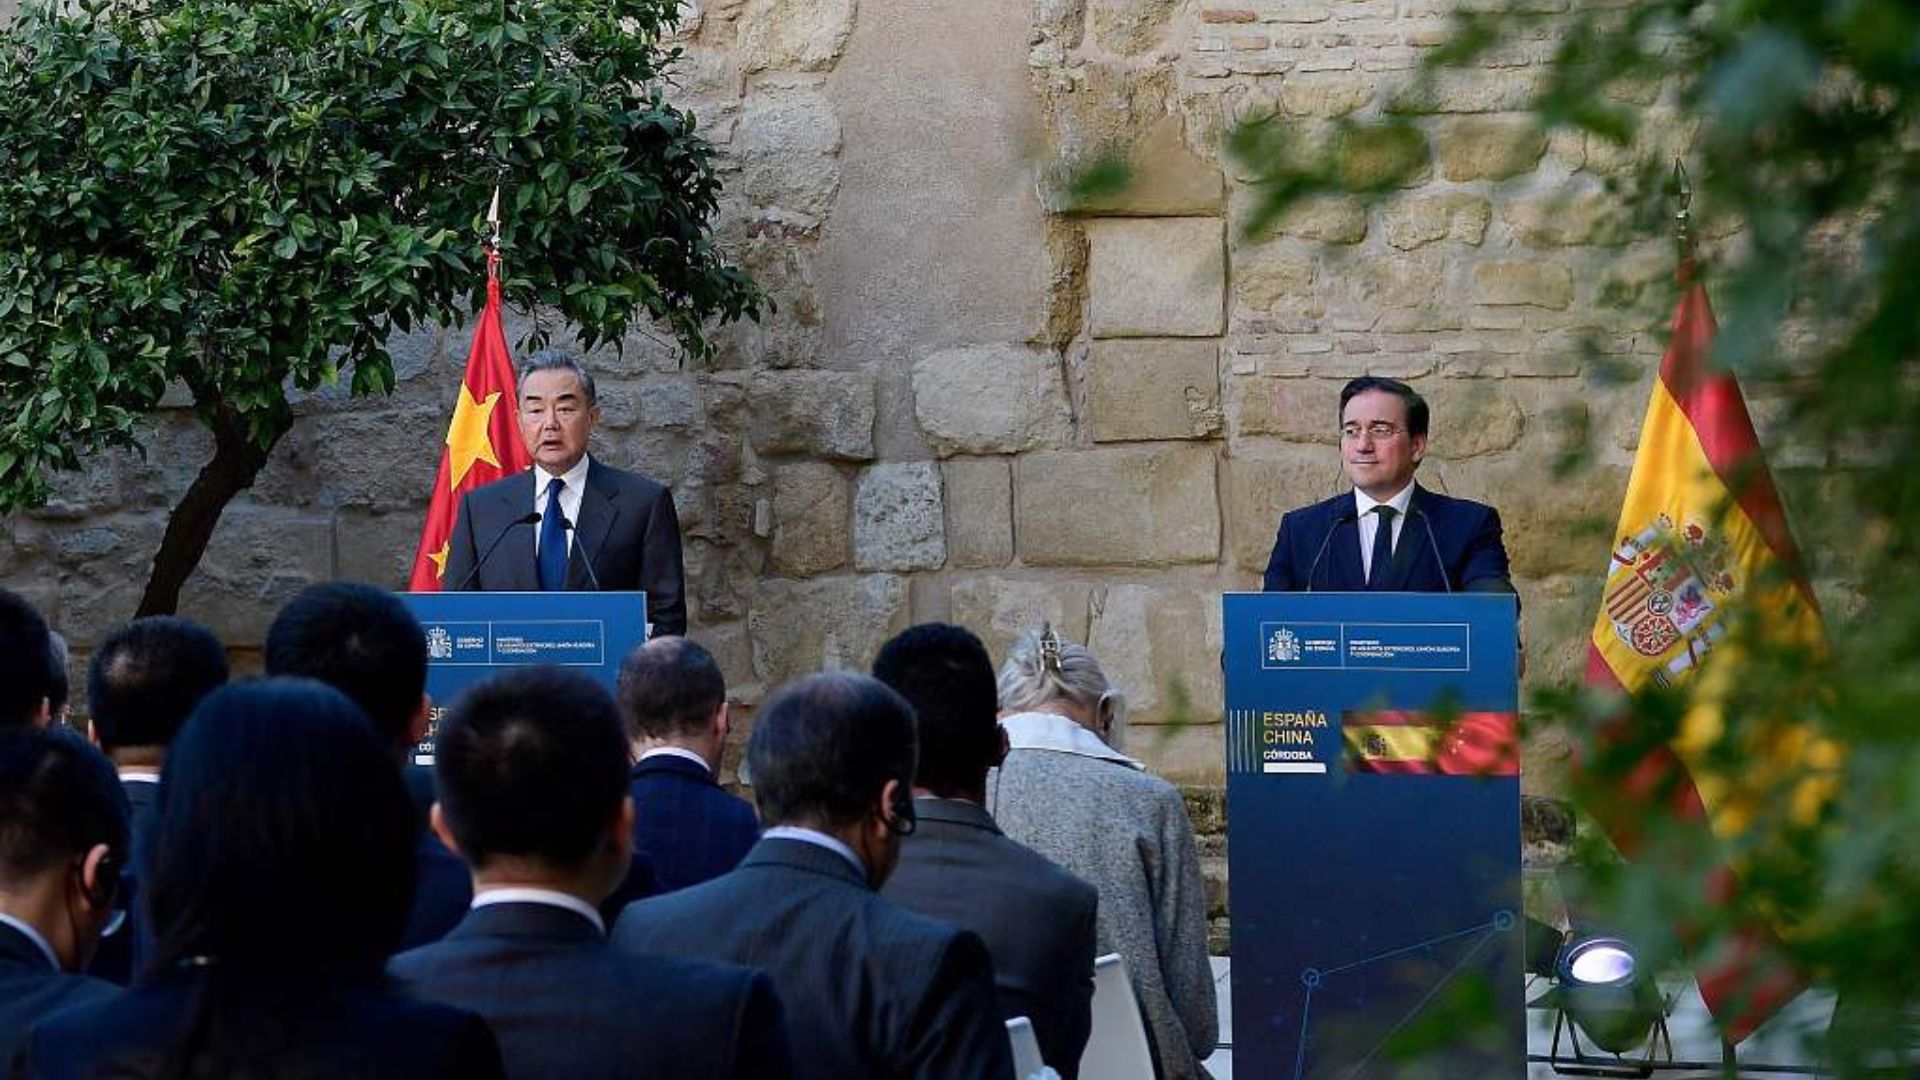 Spain's Minister of Foreign Affairs Jose Manuel Albares (R) and China's Foreign Minister Wang Yi address reporters in Cordoba on Sunday. /Cristina Quicler/CFP
